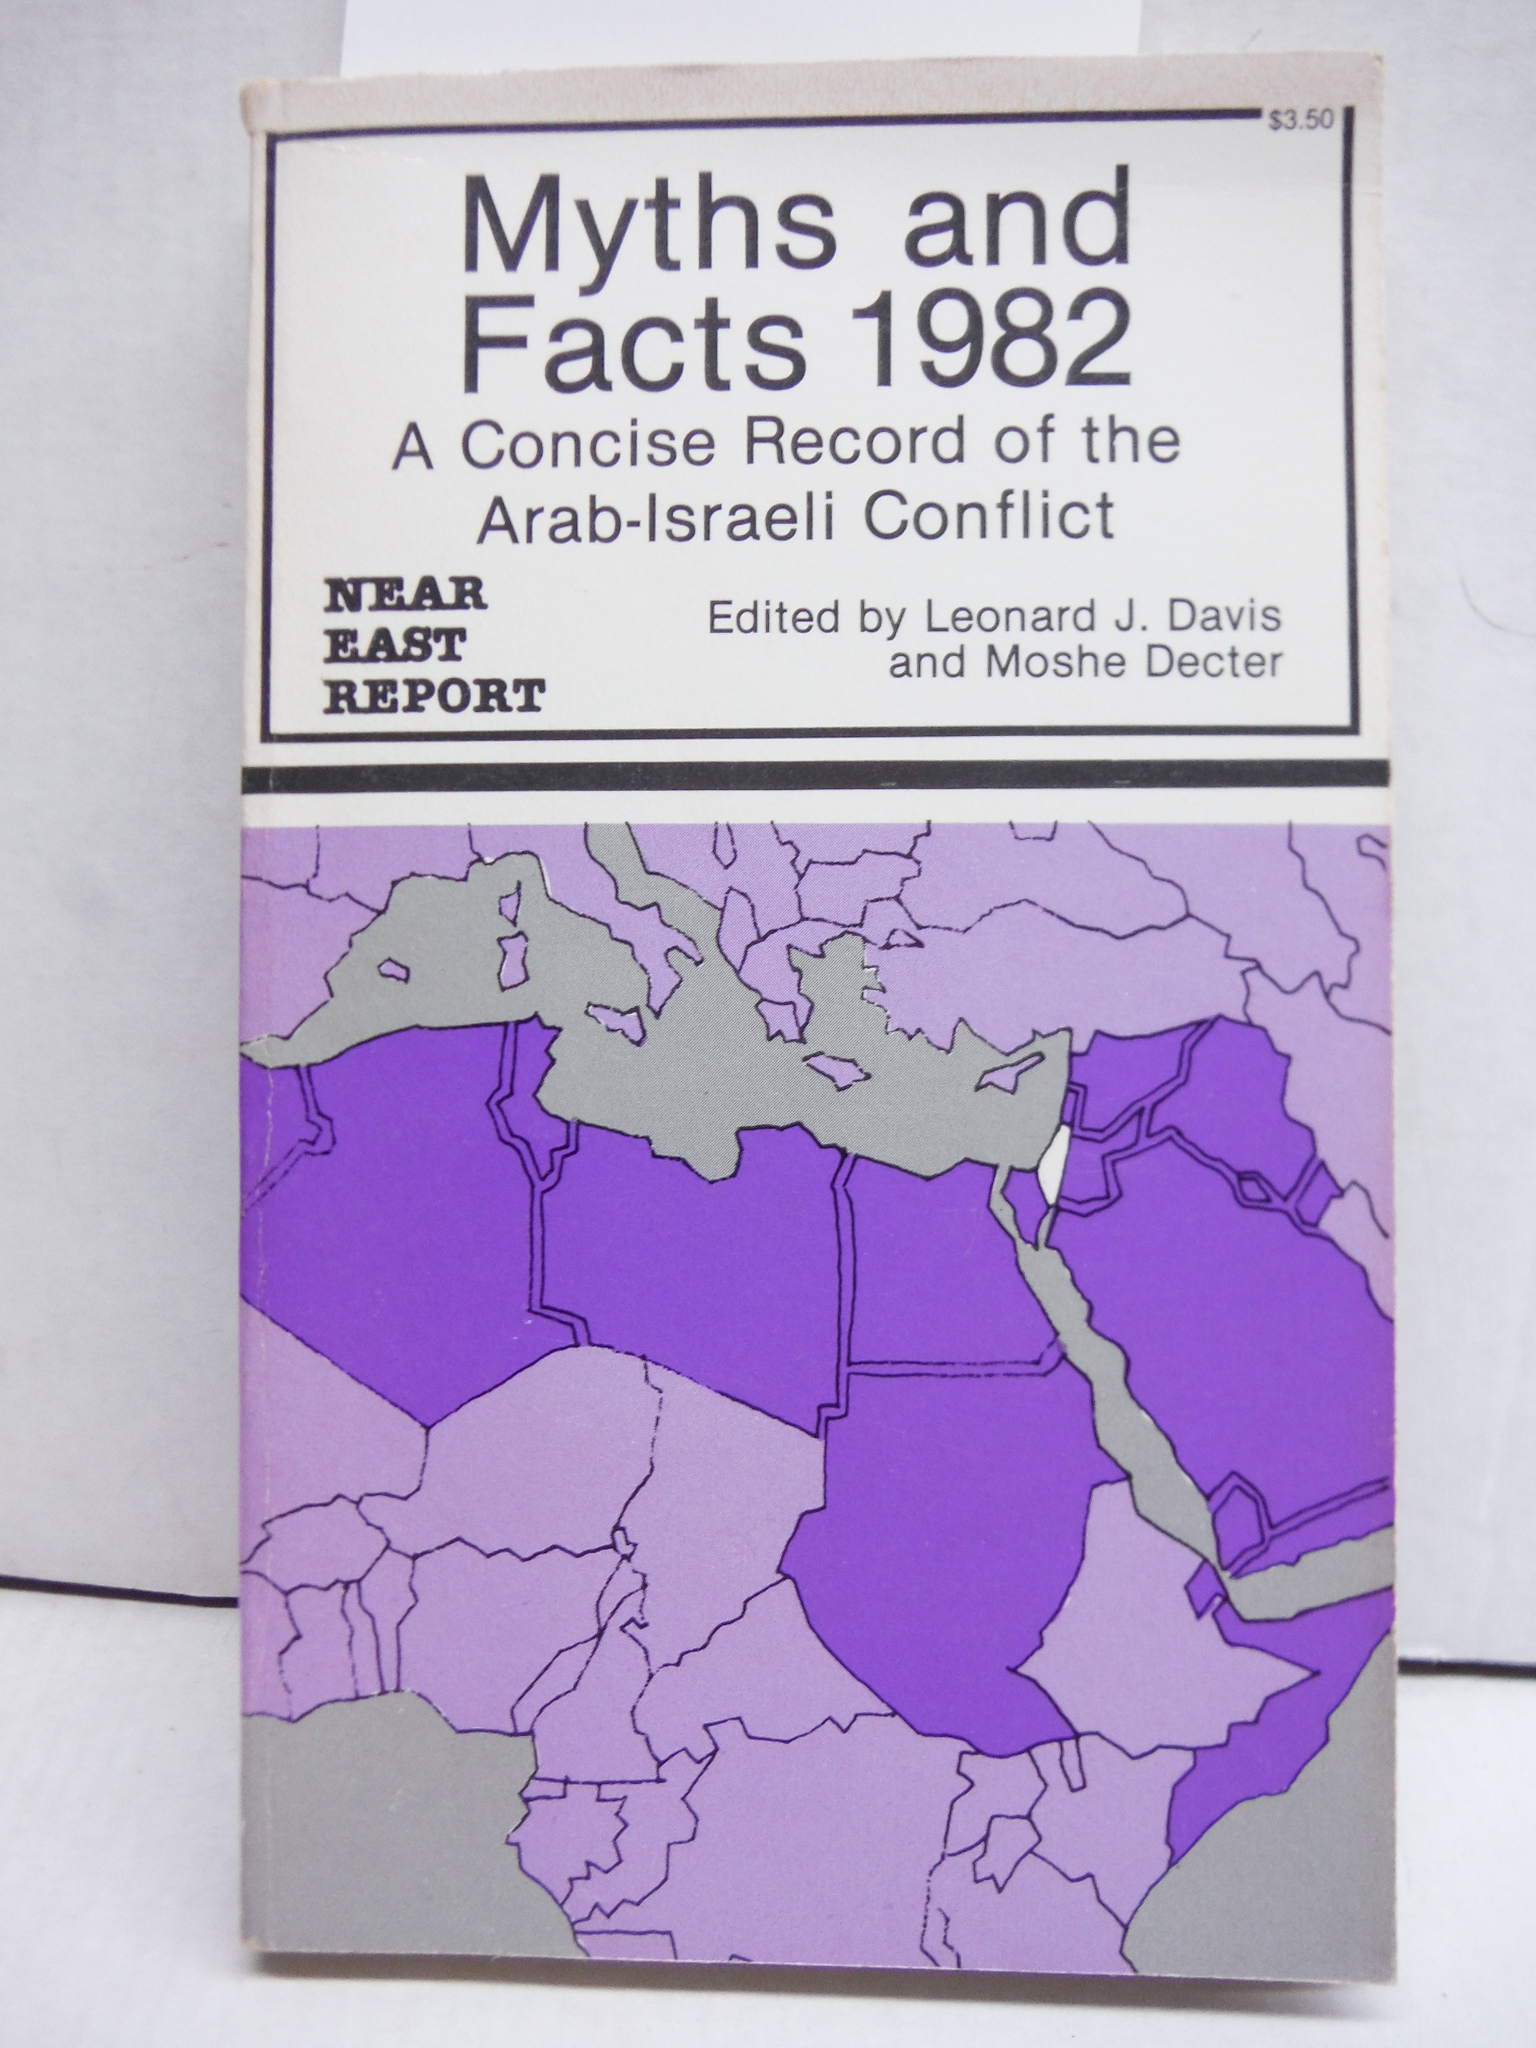 Myths and Facts 1982 (A Concise Record of the Arab-Israeli Conflict)